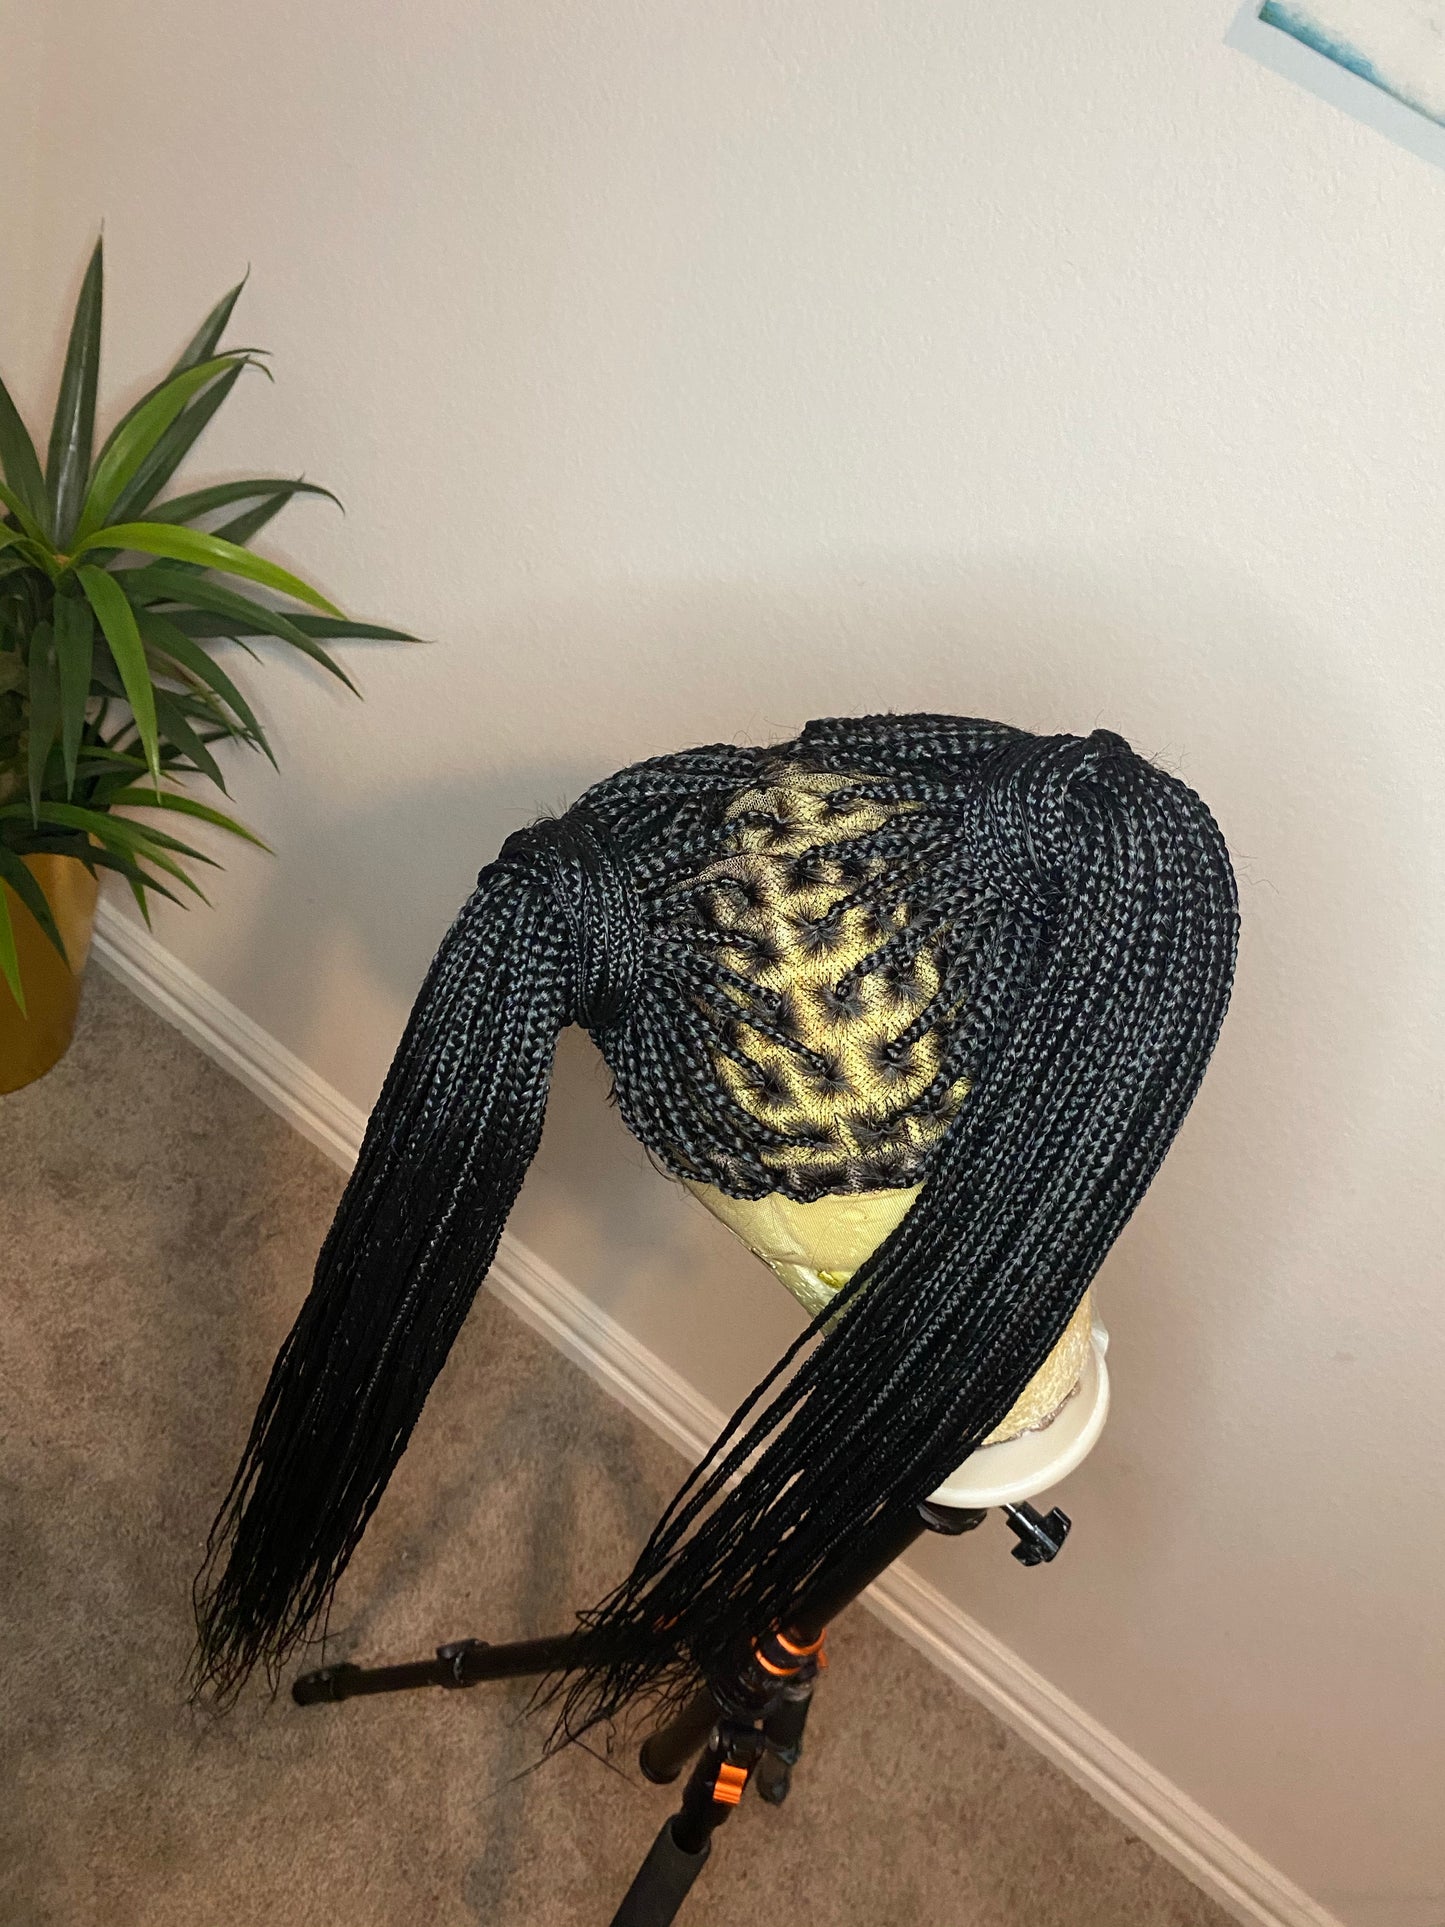 Full lace knotless braids wig | Hair Wigs